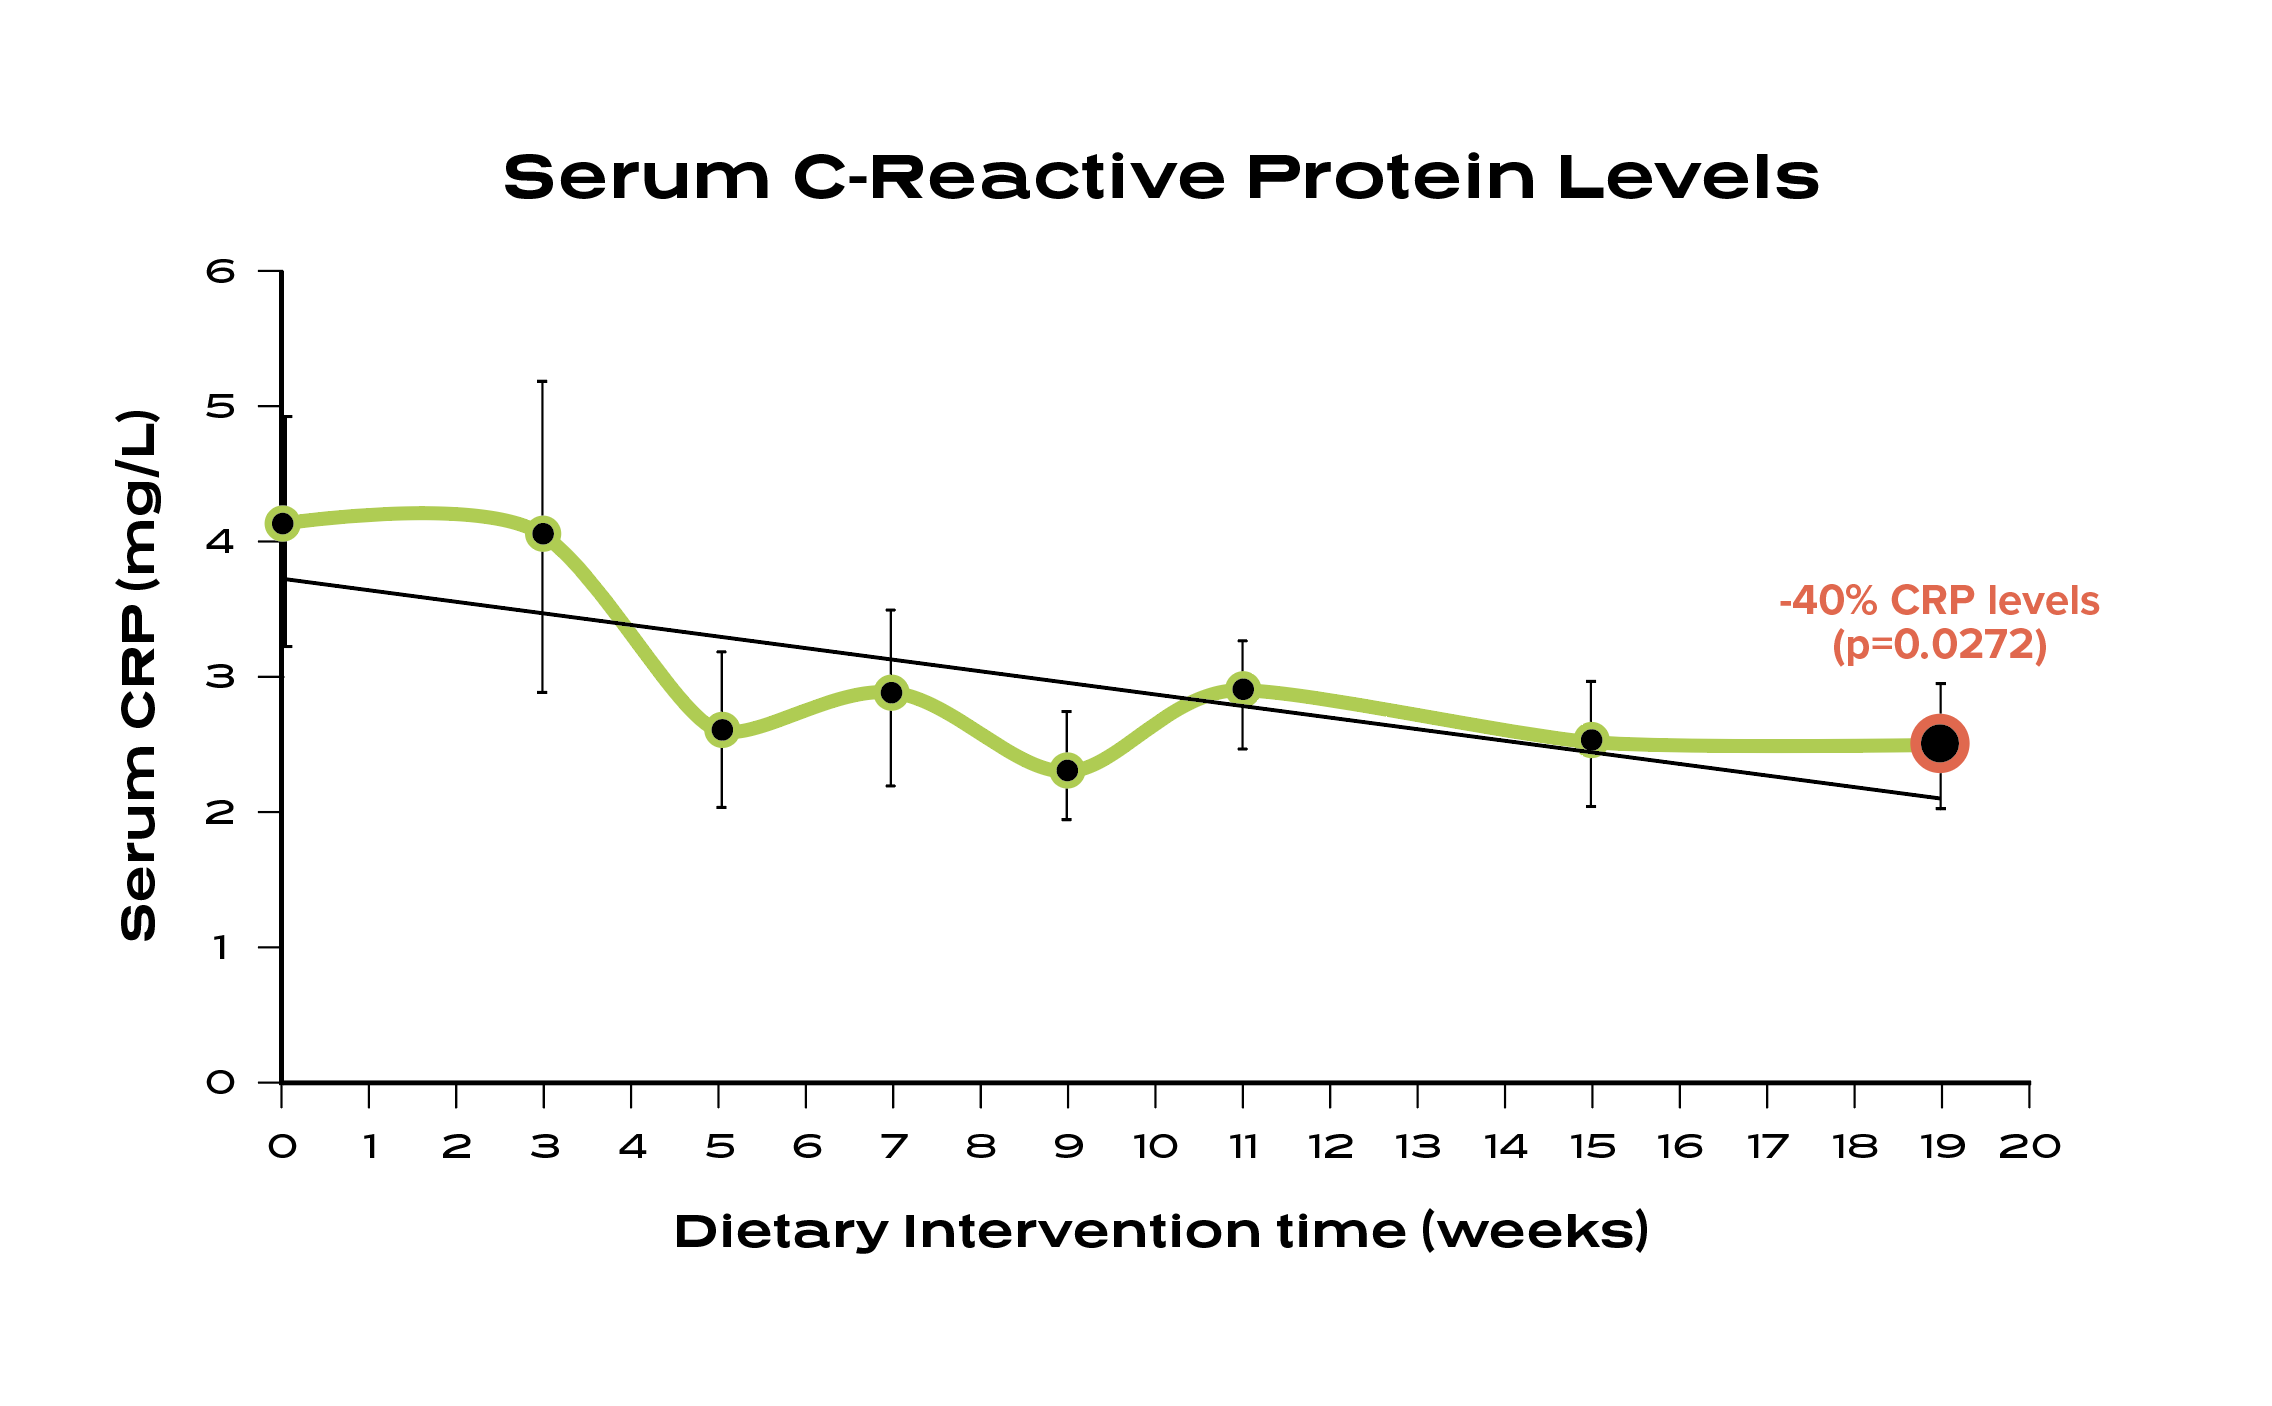 Ideal Protein Dietary Intervention Time